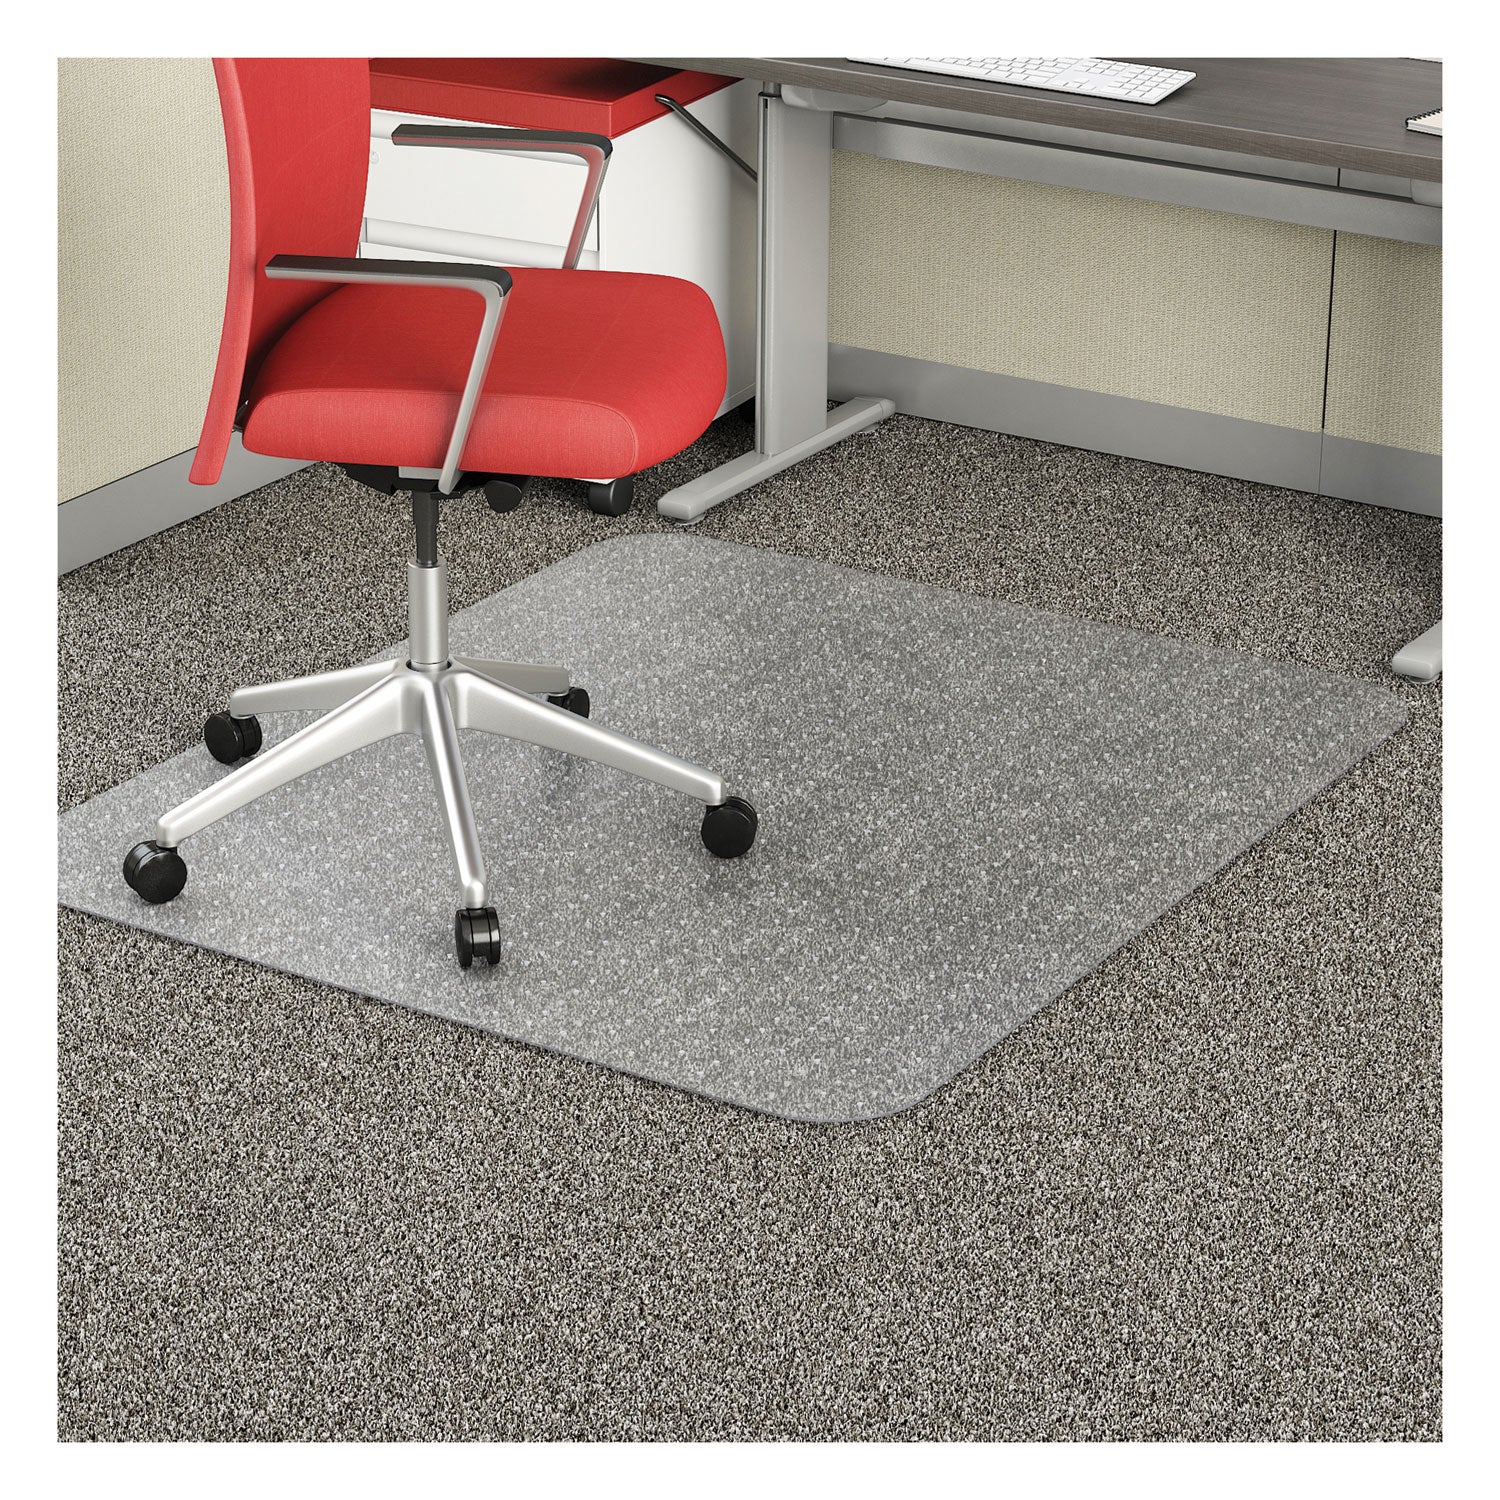 economat-occasional-use-chair-mat-low-pile-carpet-roll-46-x-60-rectangle-clear_defcm11442fcom - 2